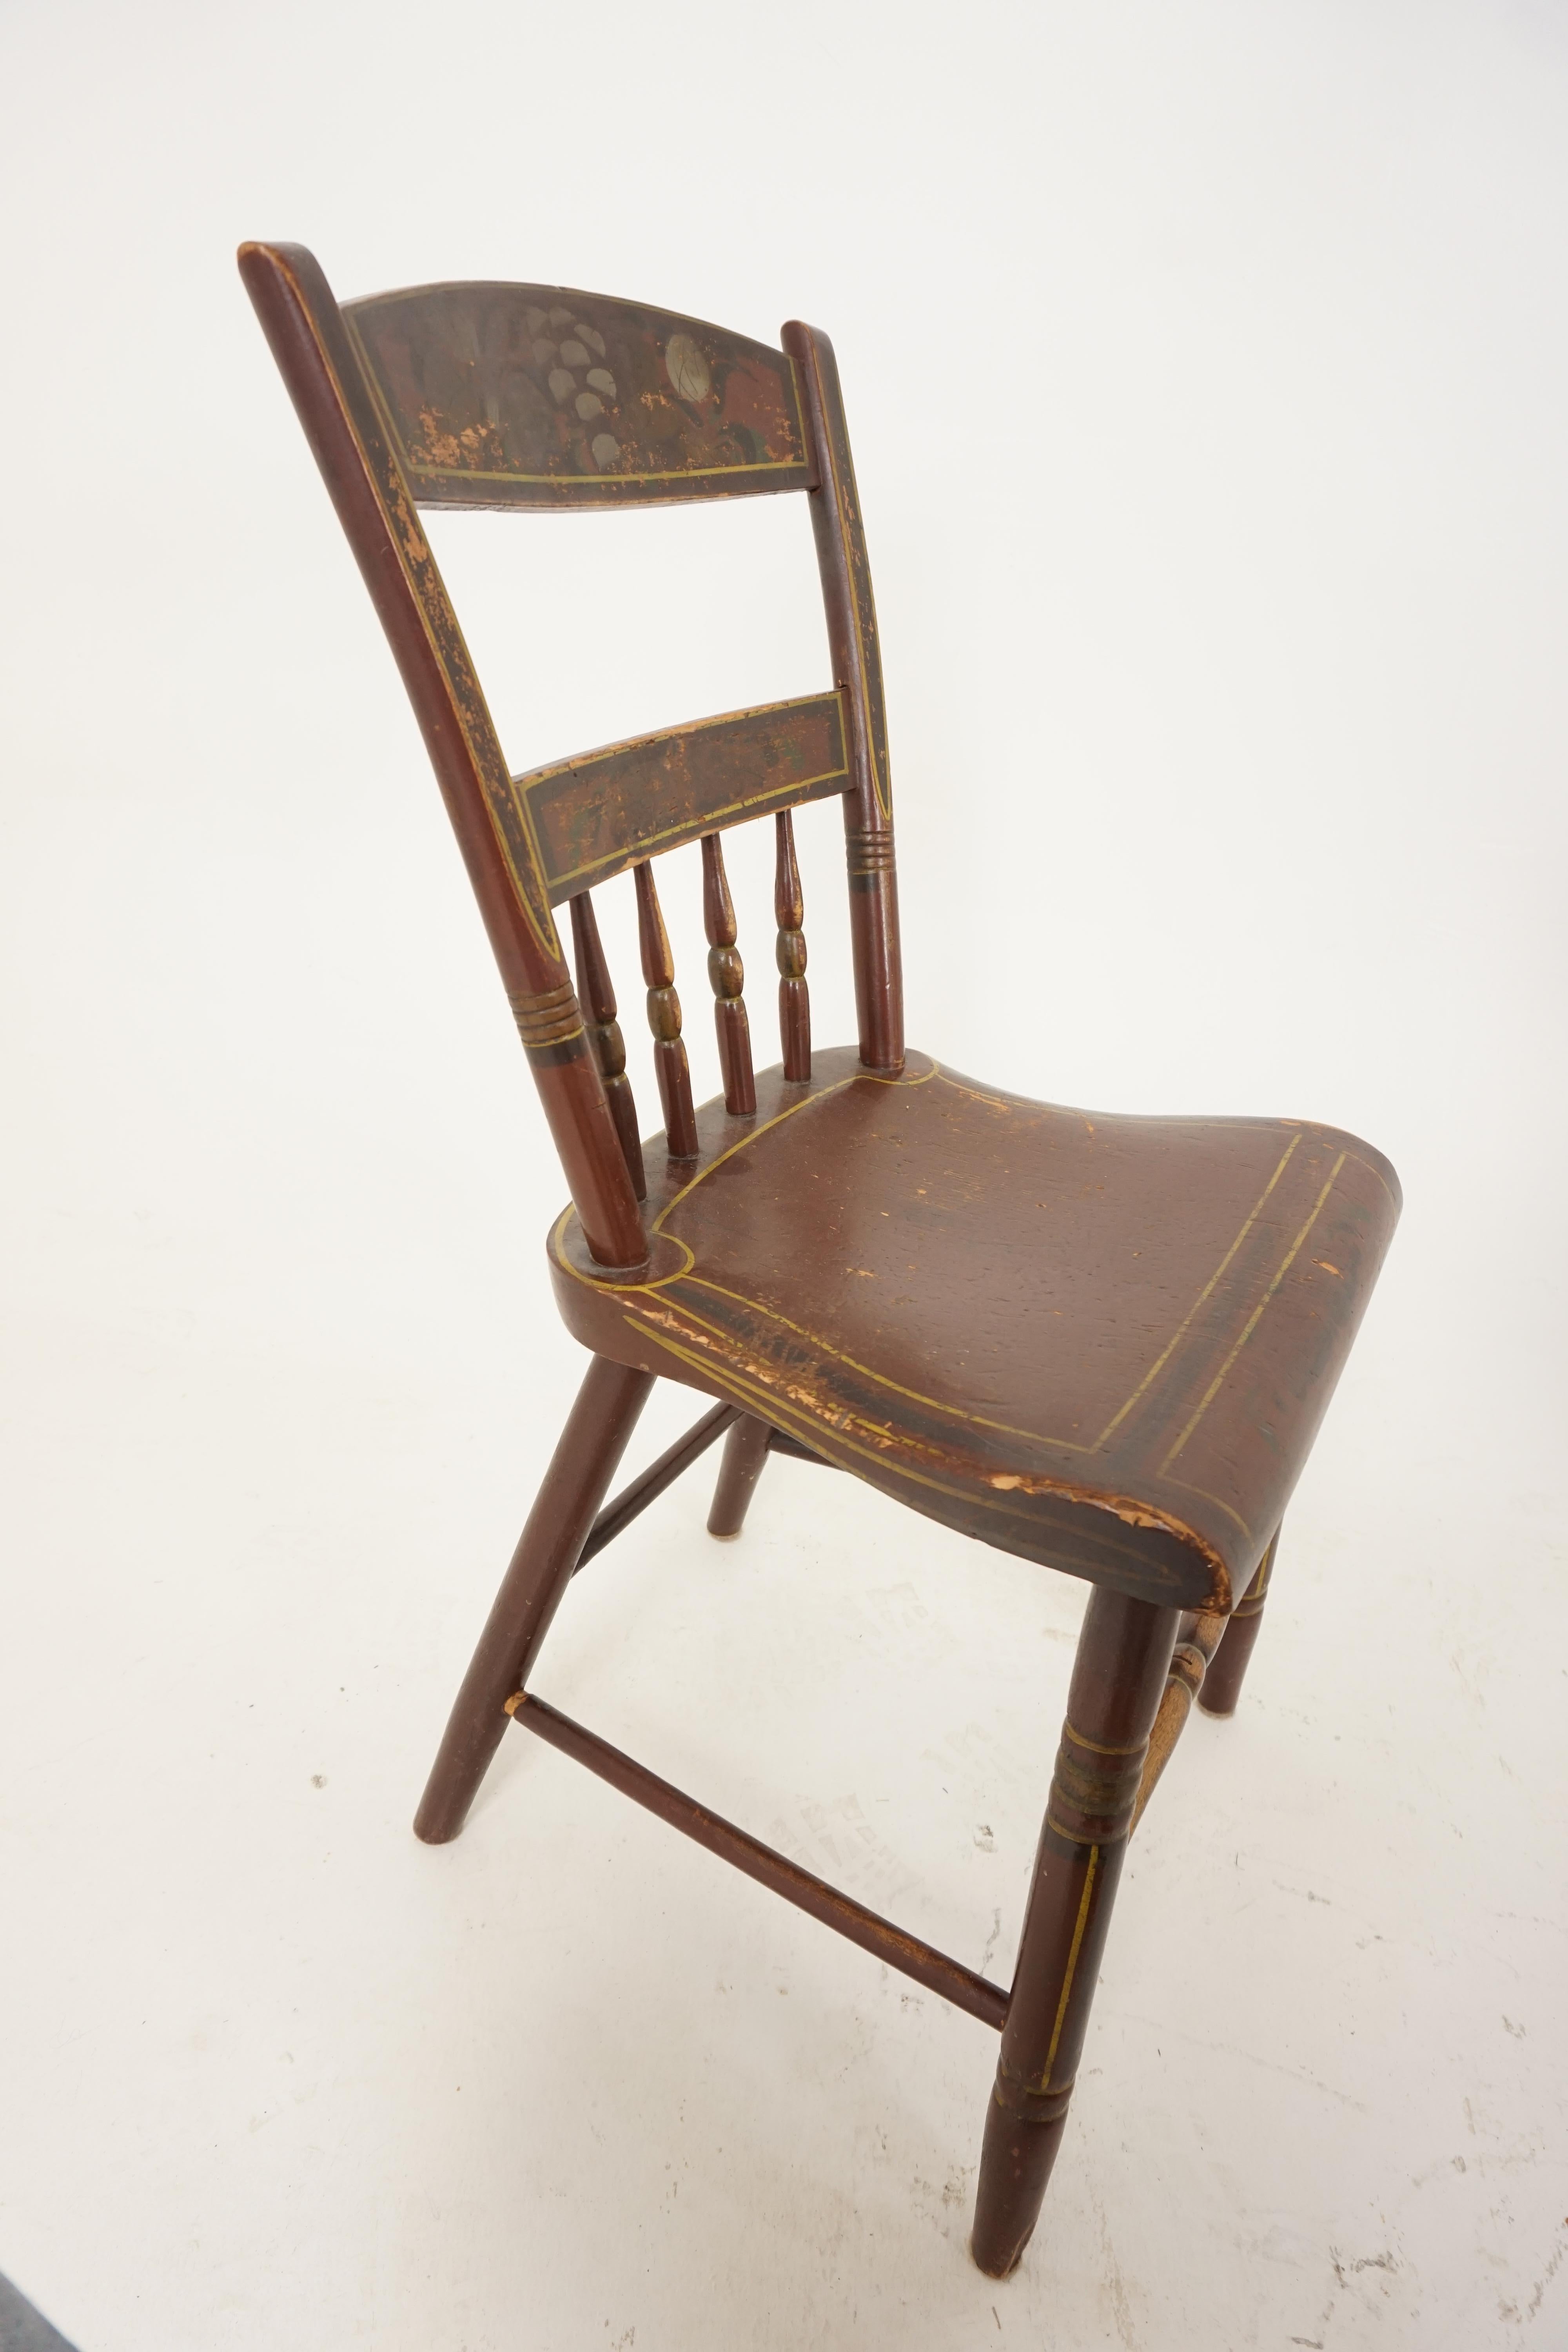 American Antique Chairs, Set of 6, Pennsylvania Dutch Painted Plank Bottom Chairs, 1890s